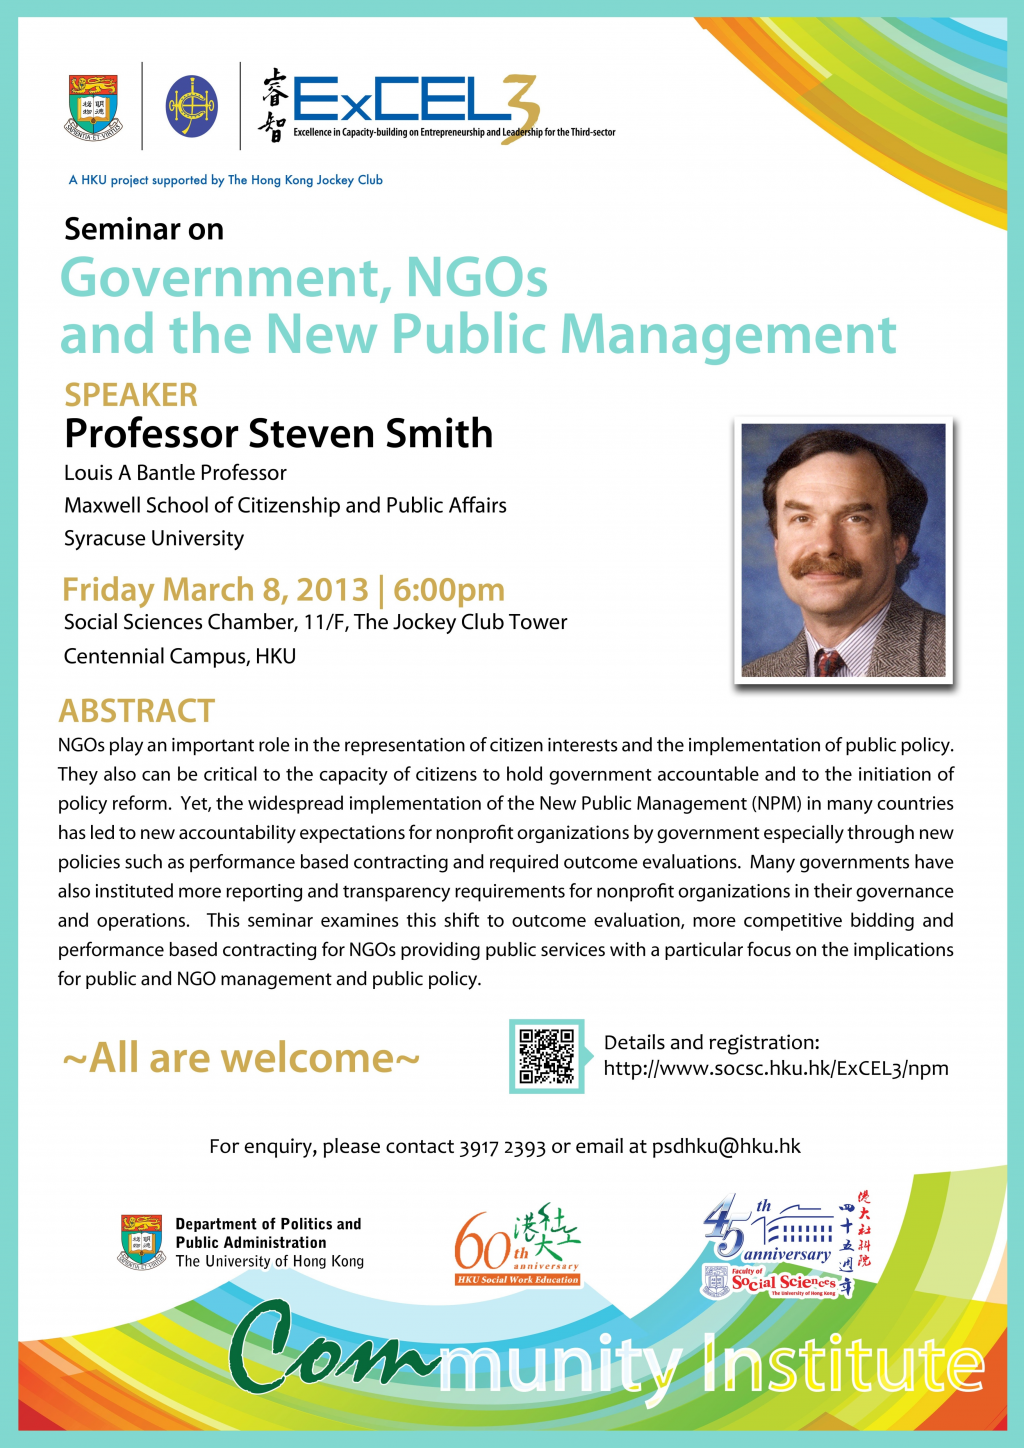 Seminar on Government, NGOs, and the New Public Management